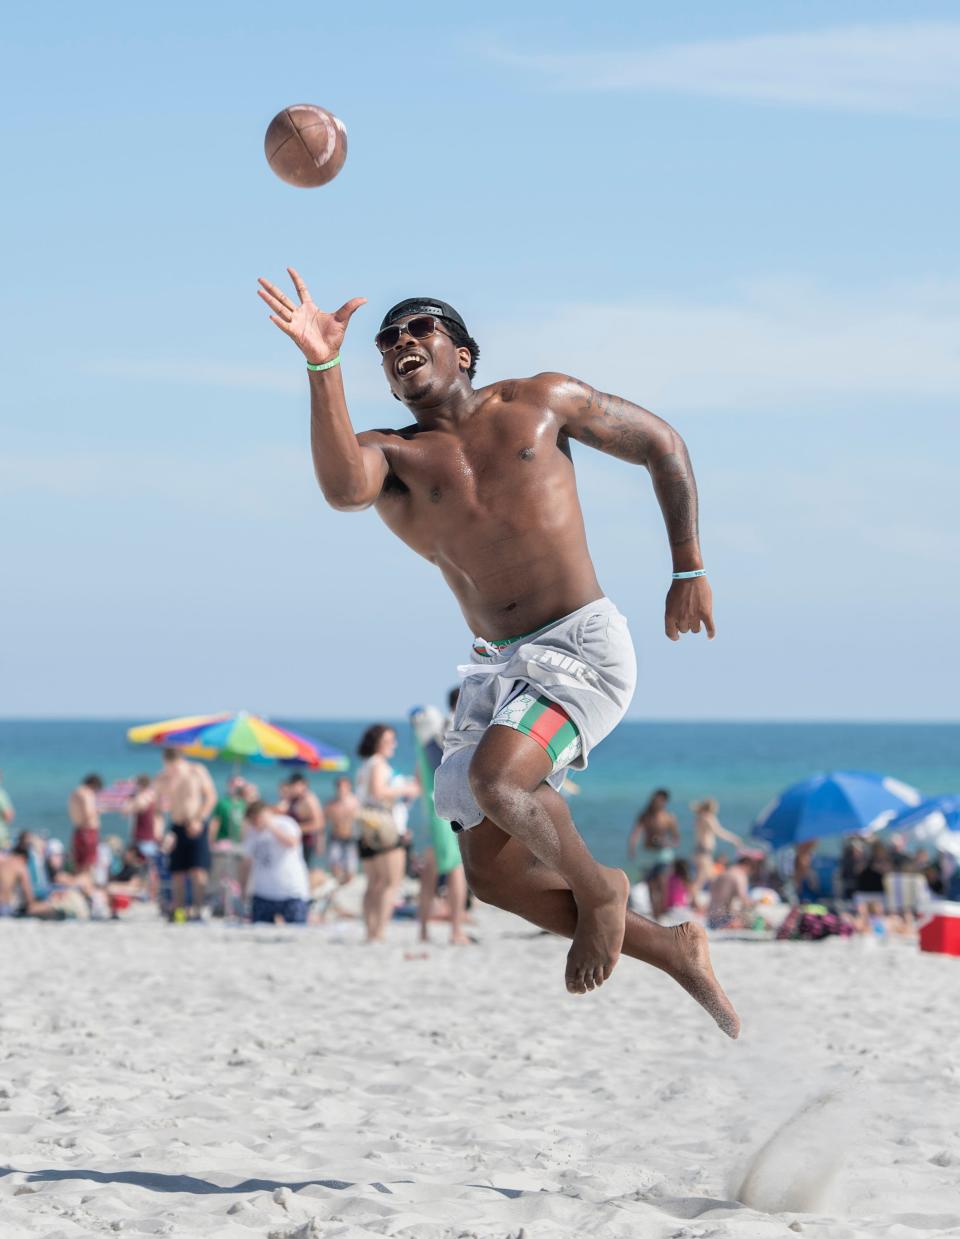 University of West Florida sophomore and Argos football running back Brelan Franks, 21, of Mobile, Alabama, makes a one-handed catch while playing with friends Thursday during spring break at Pensacola Beach.